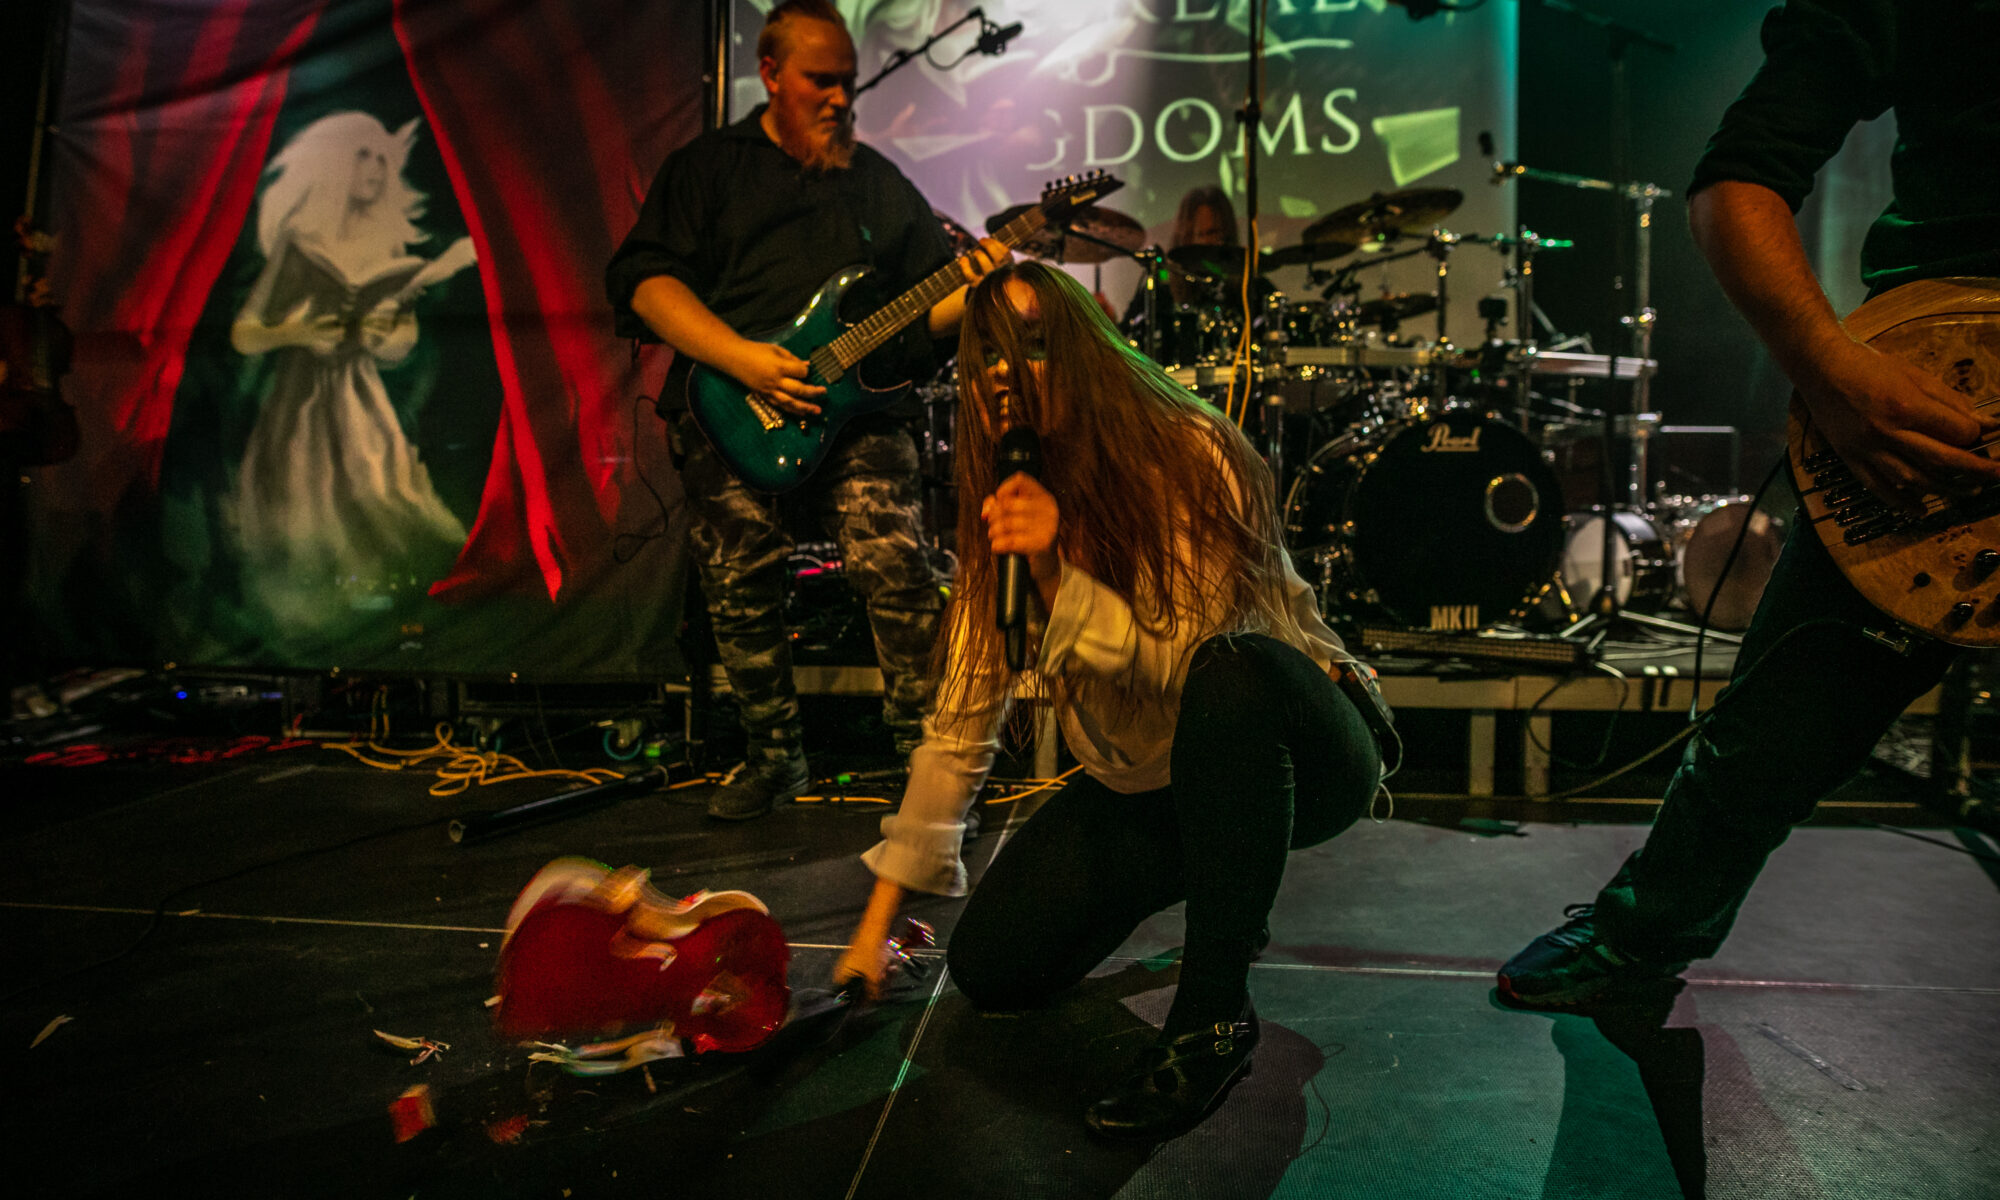 Ethereal Kingdoms live with finntroll. Sofia Schmidt destroying a violin on stage.